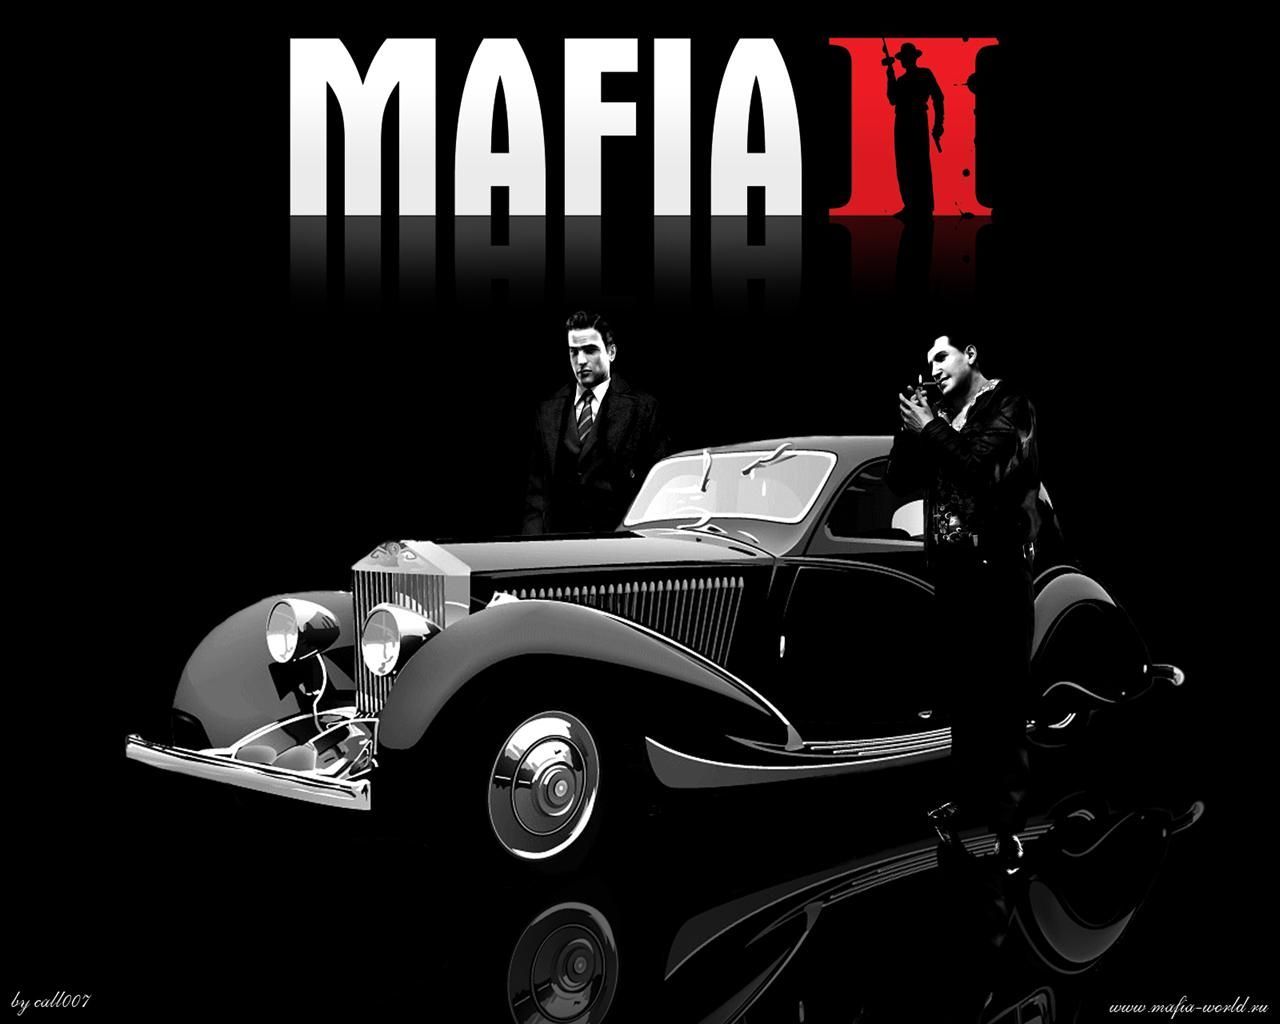 Mafia free Wallpapers (44 photos) for your desktop, download pictures